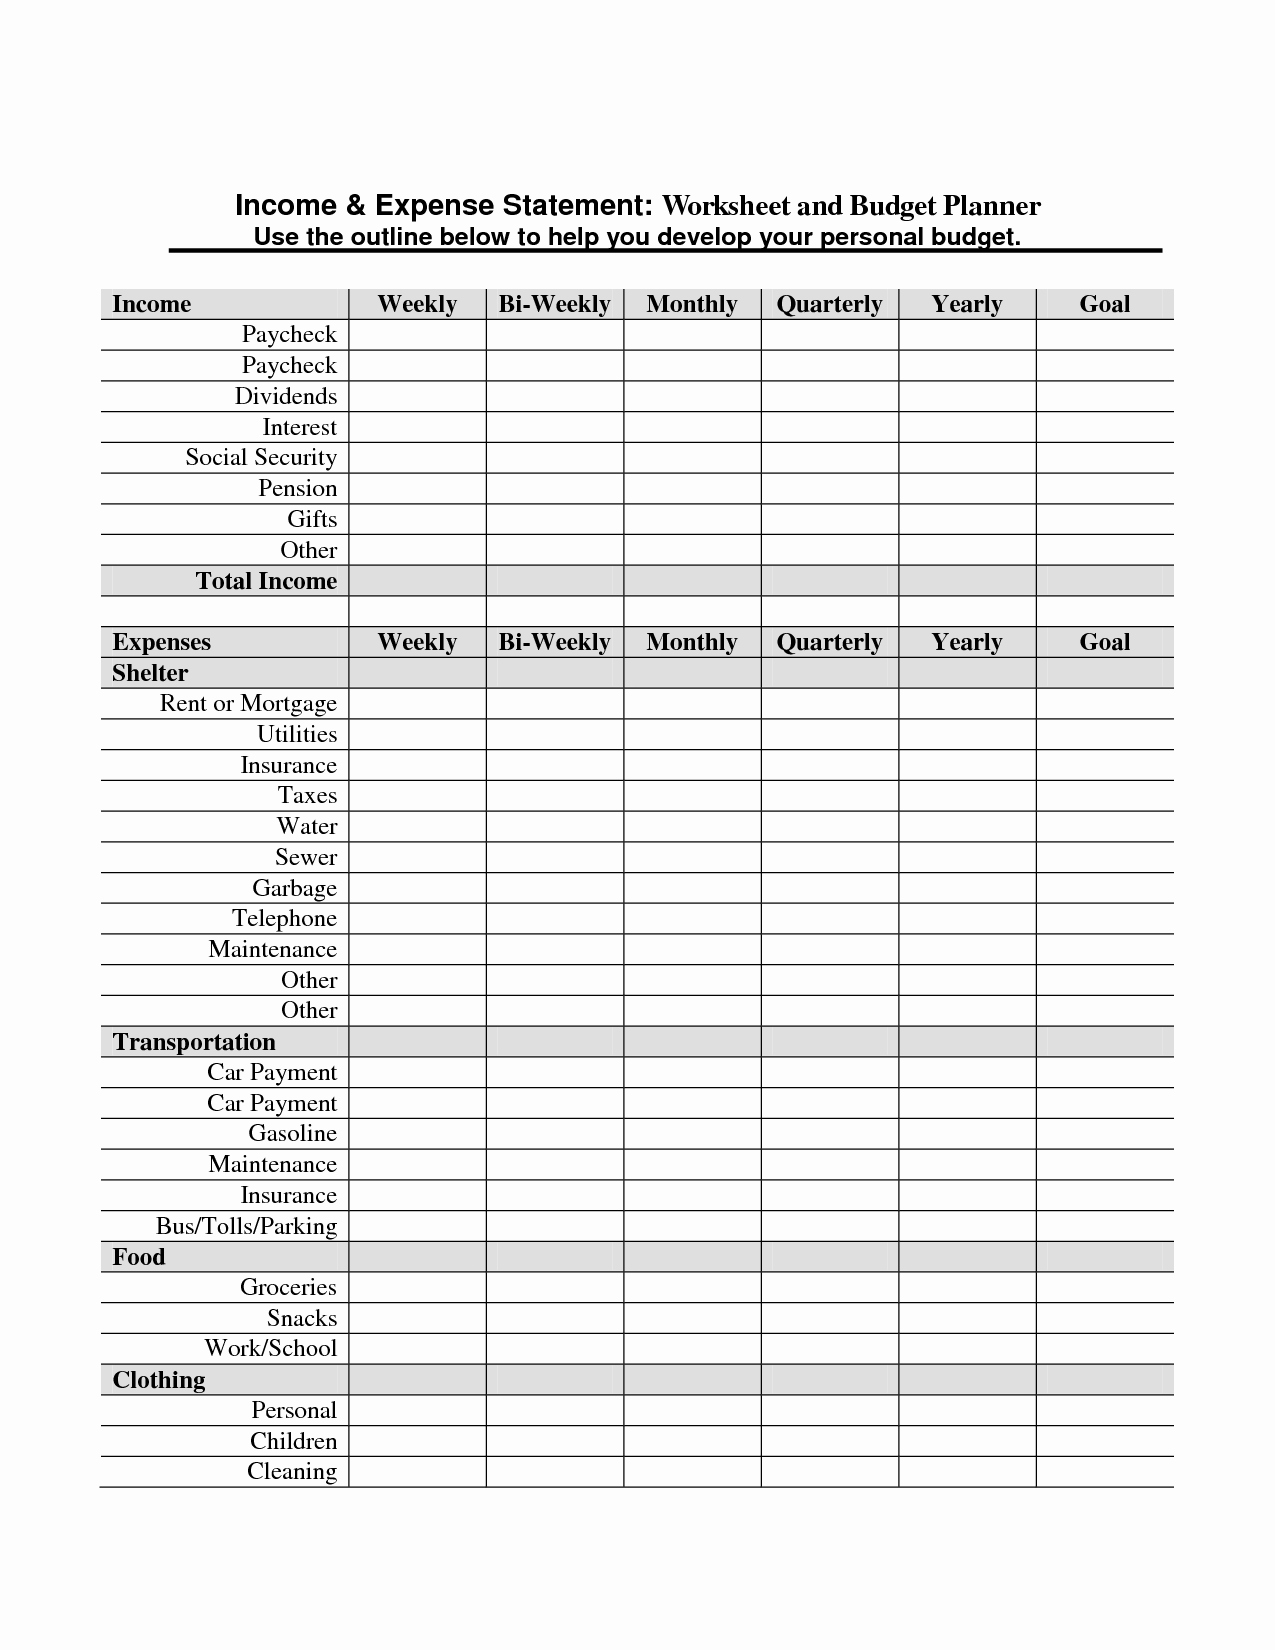 Income and Expense Statement Template Elegant 12 Best Of In E Expense Monthly Bud Worksheet